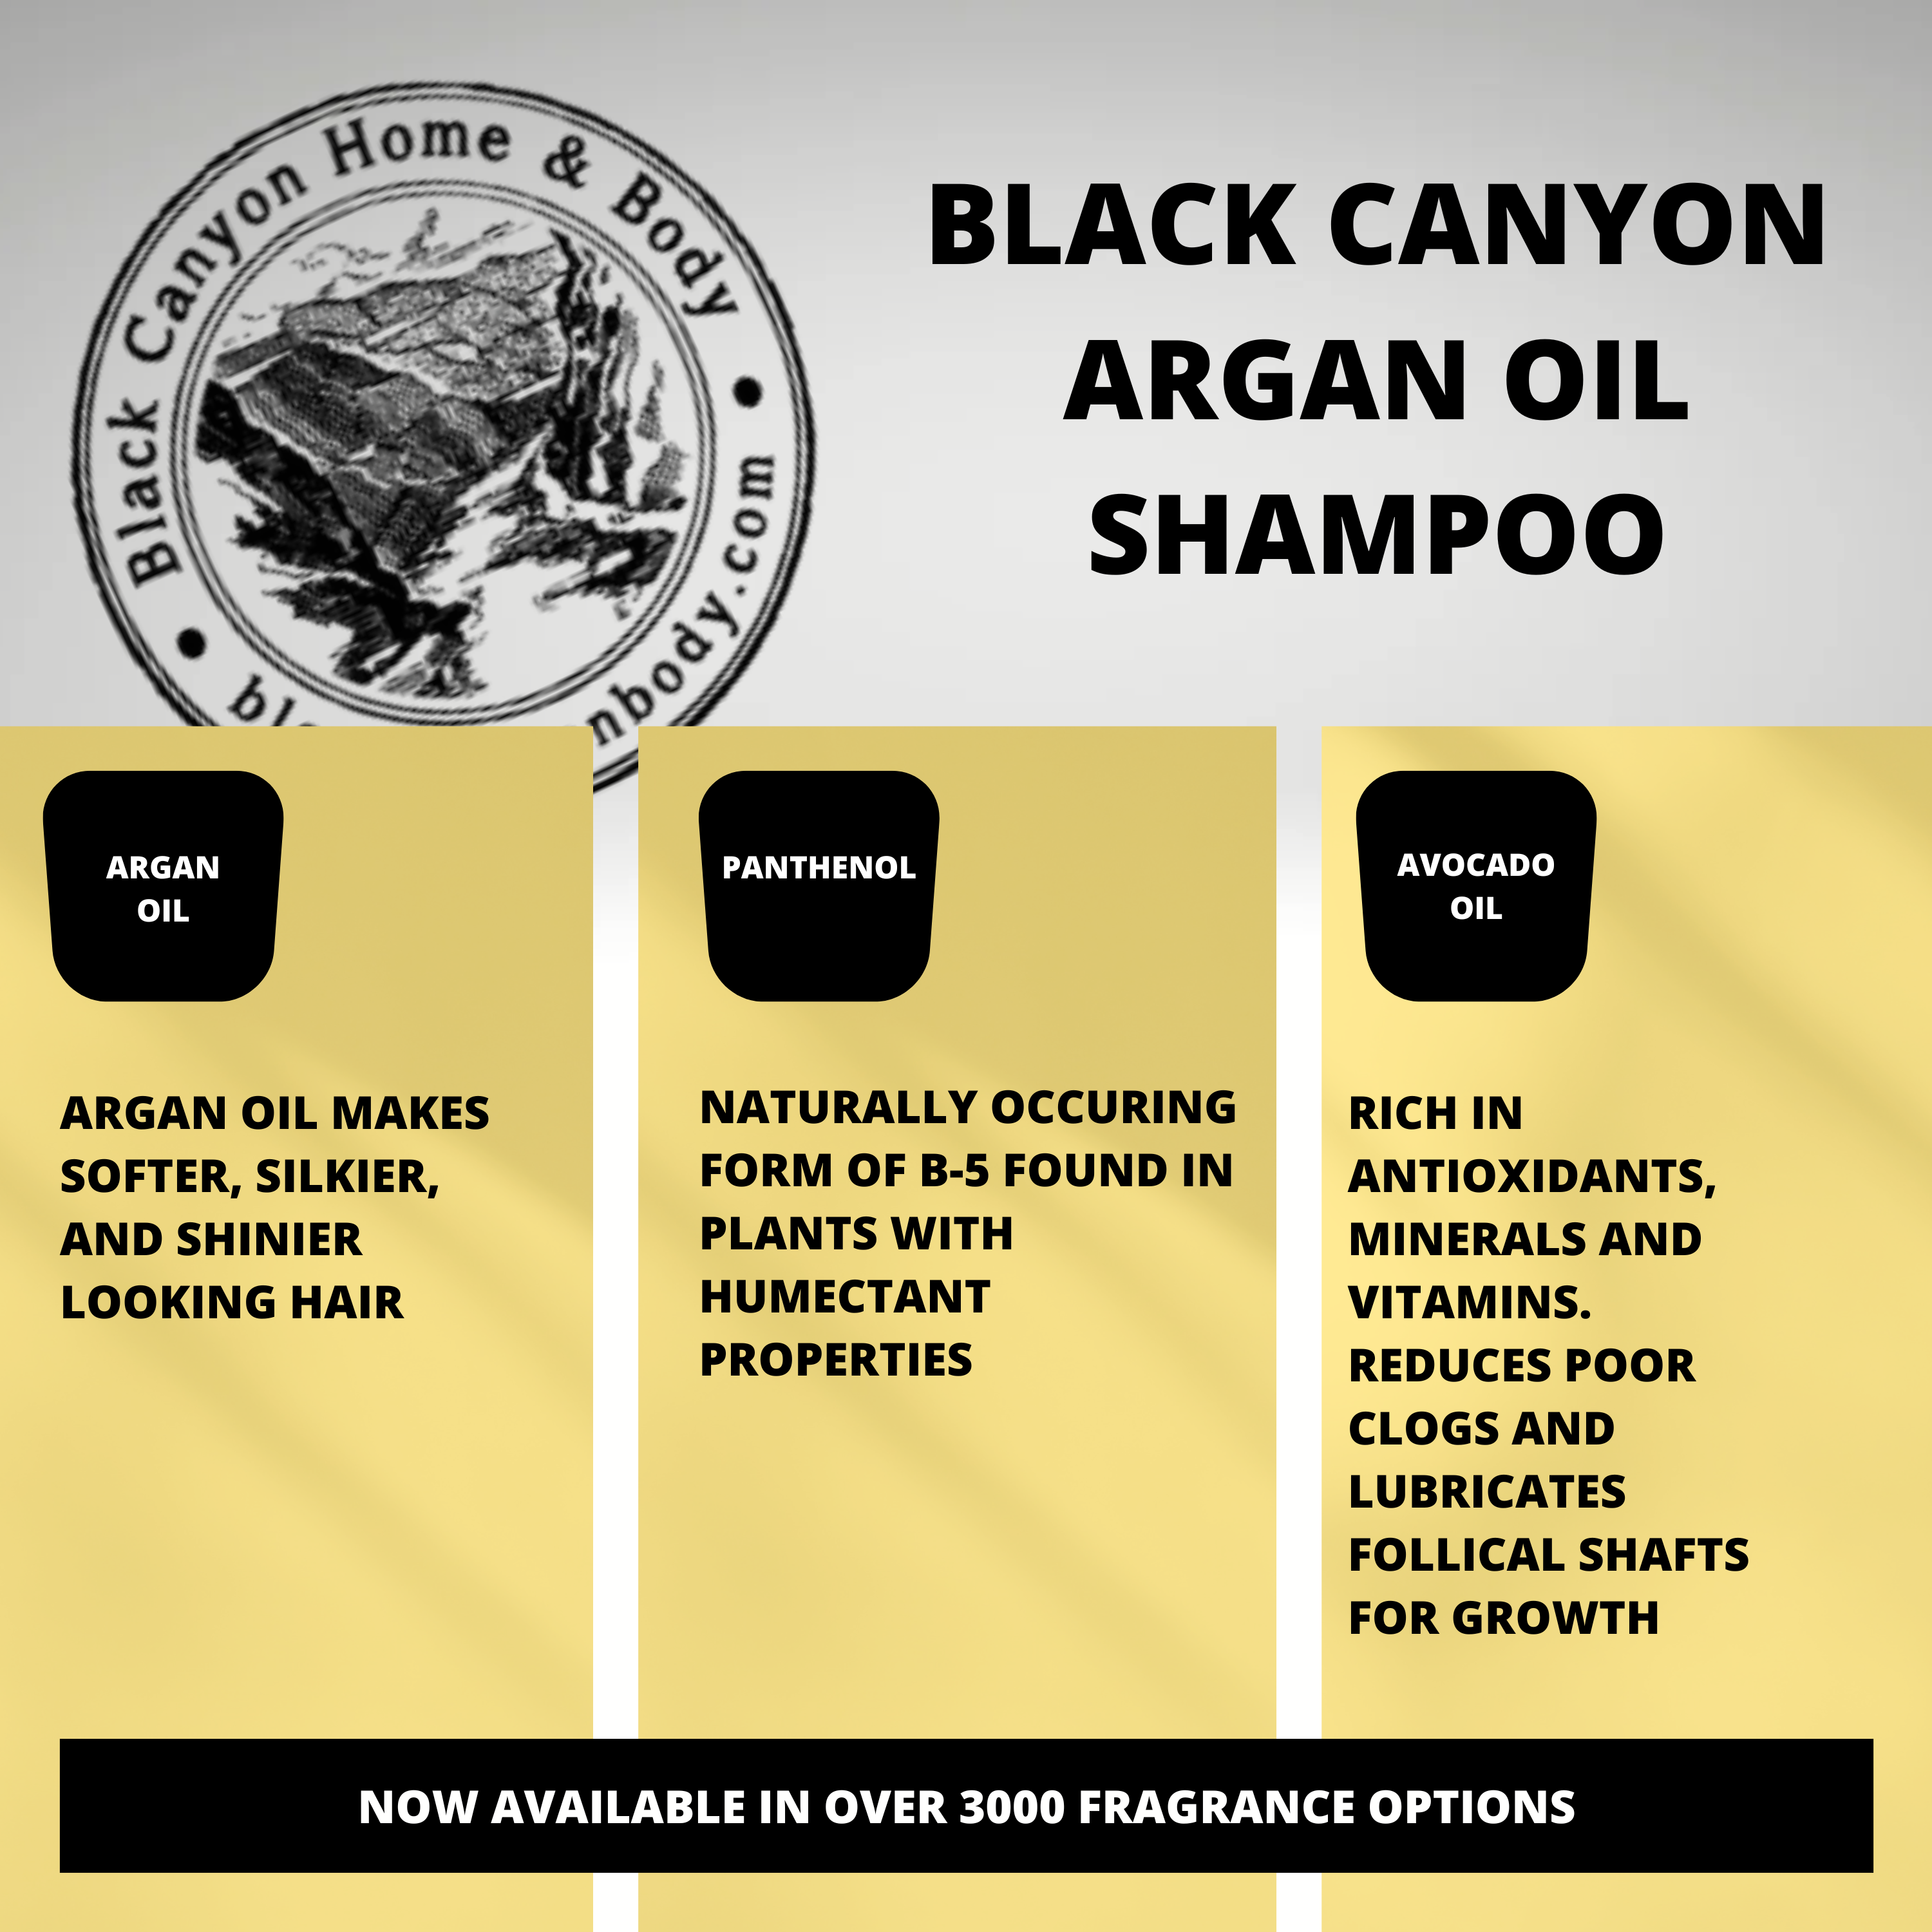 Black Canyon Christmas Candy Cane Scented Shampoo with Argan Oil